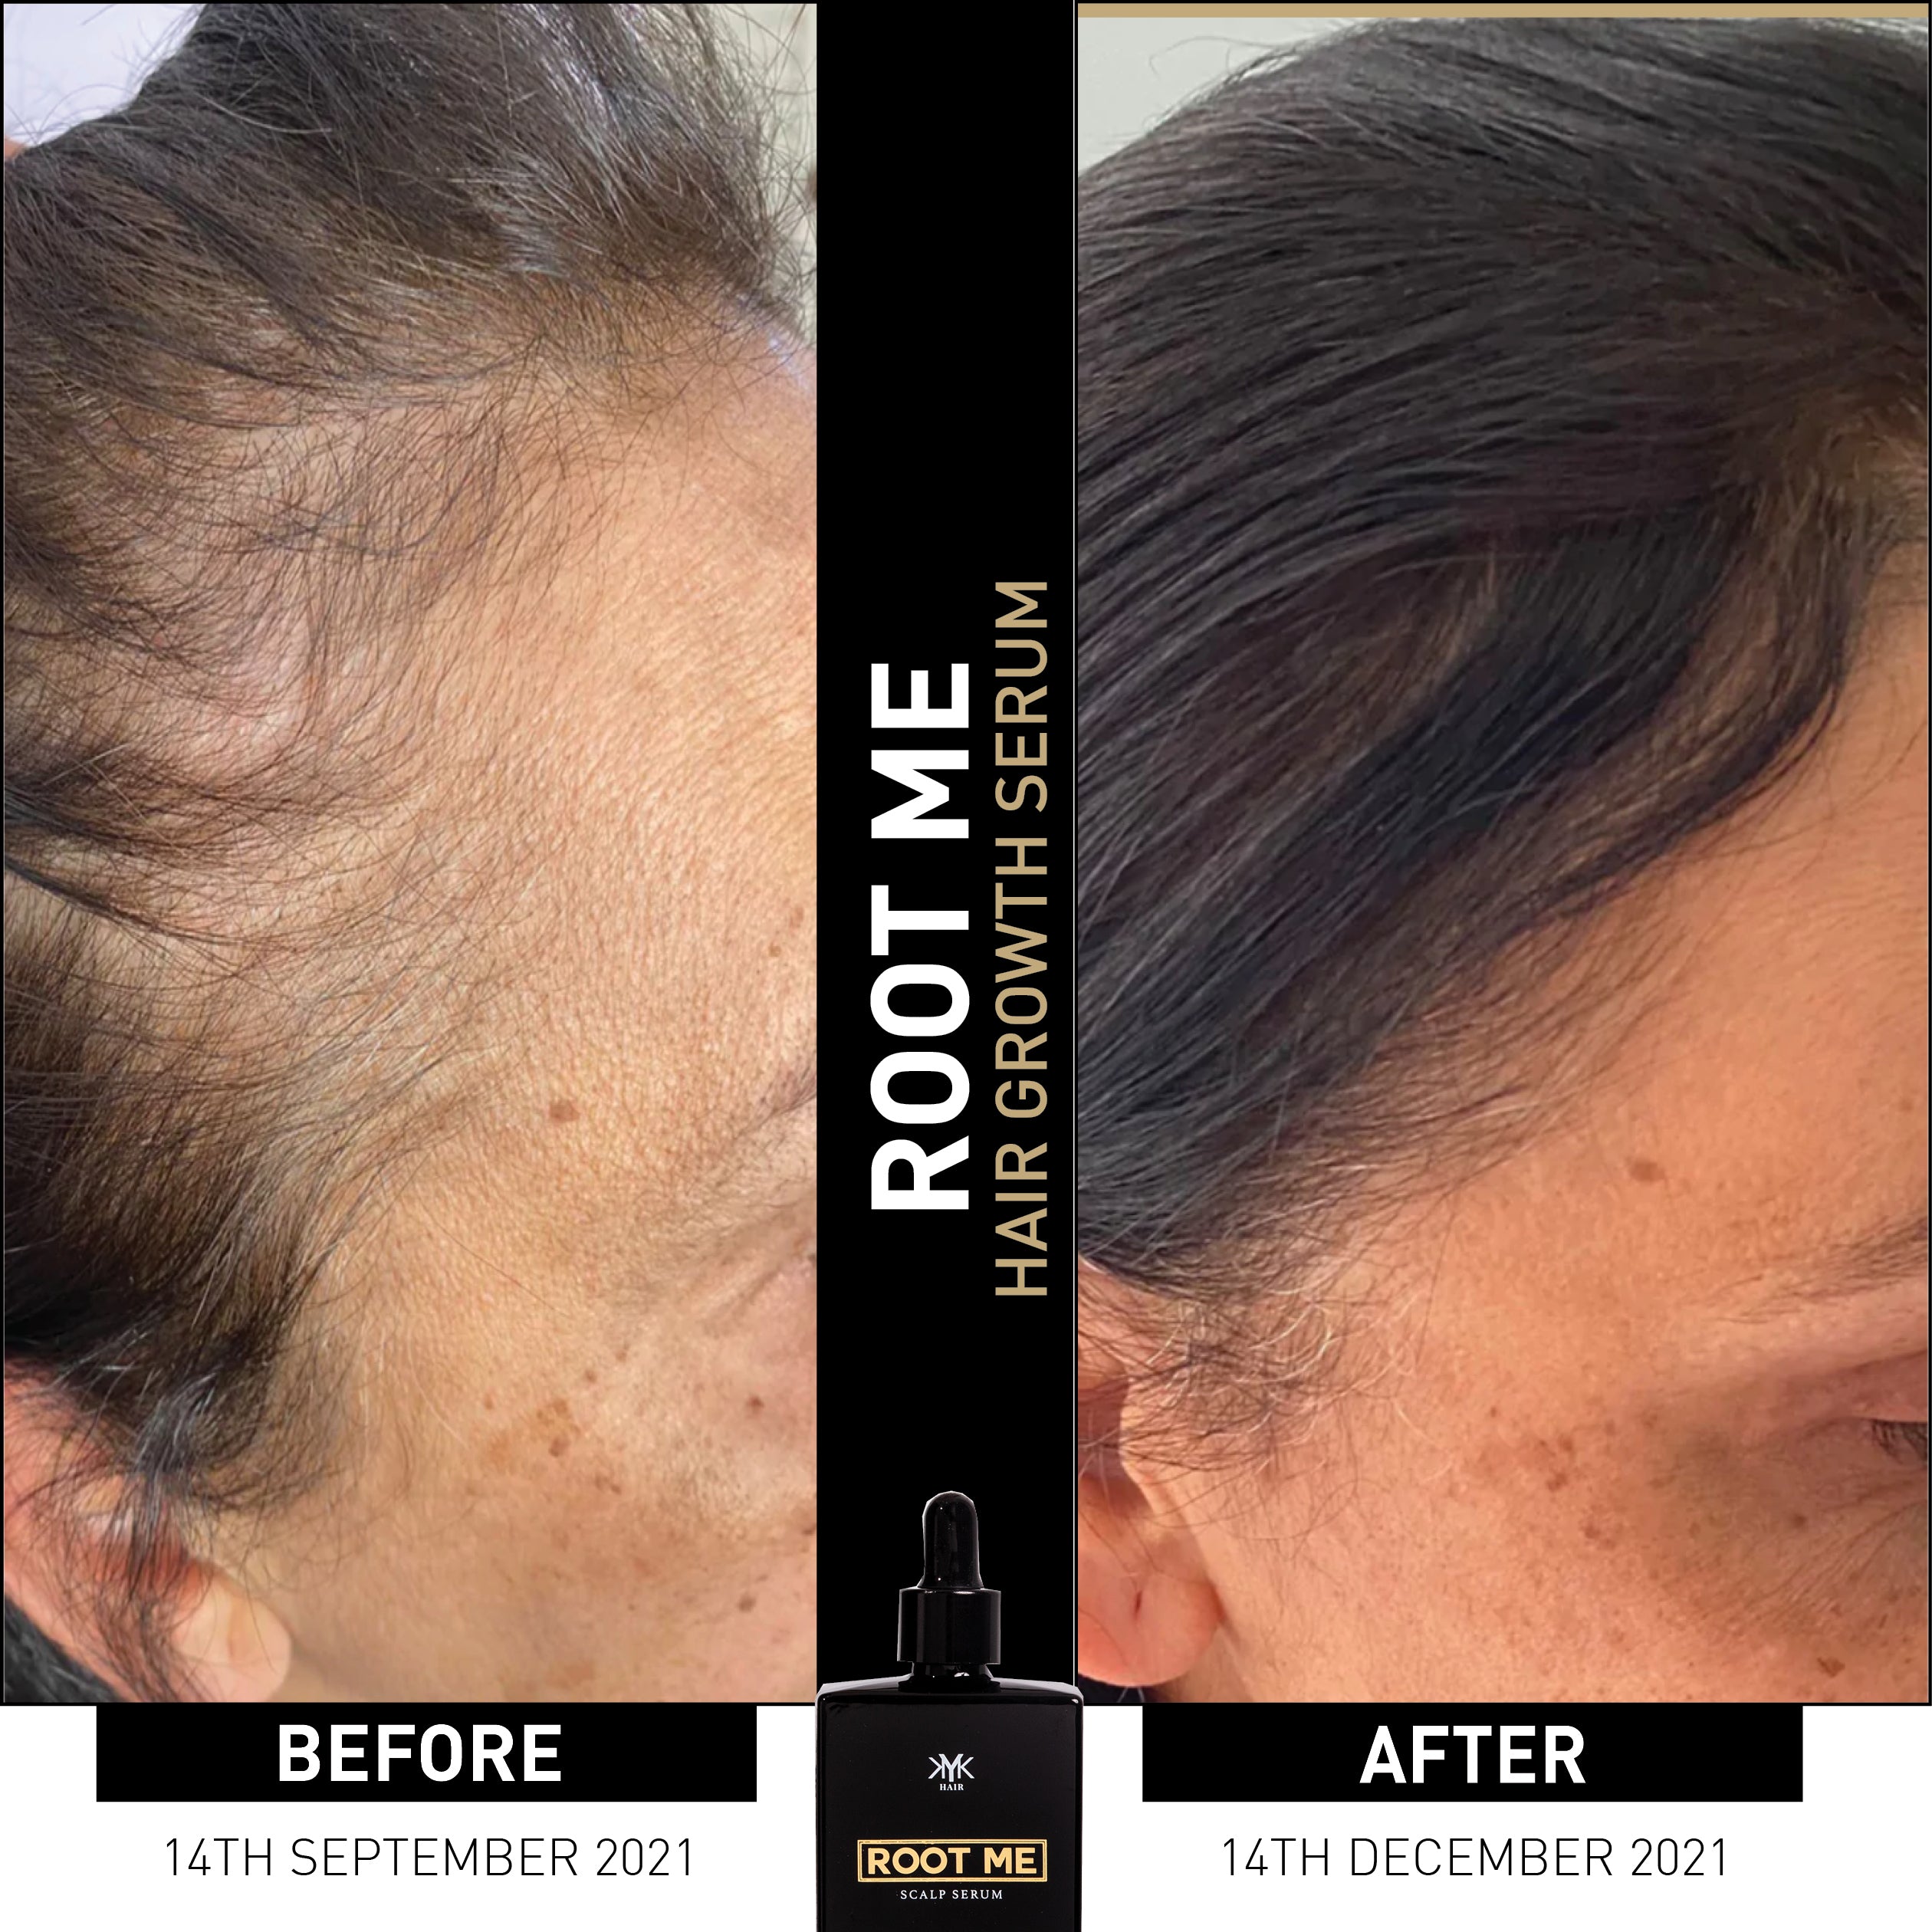 BEFORE AND AFTER - Treated with KYK ROOT ME